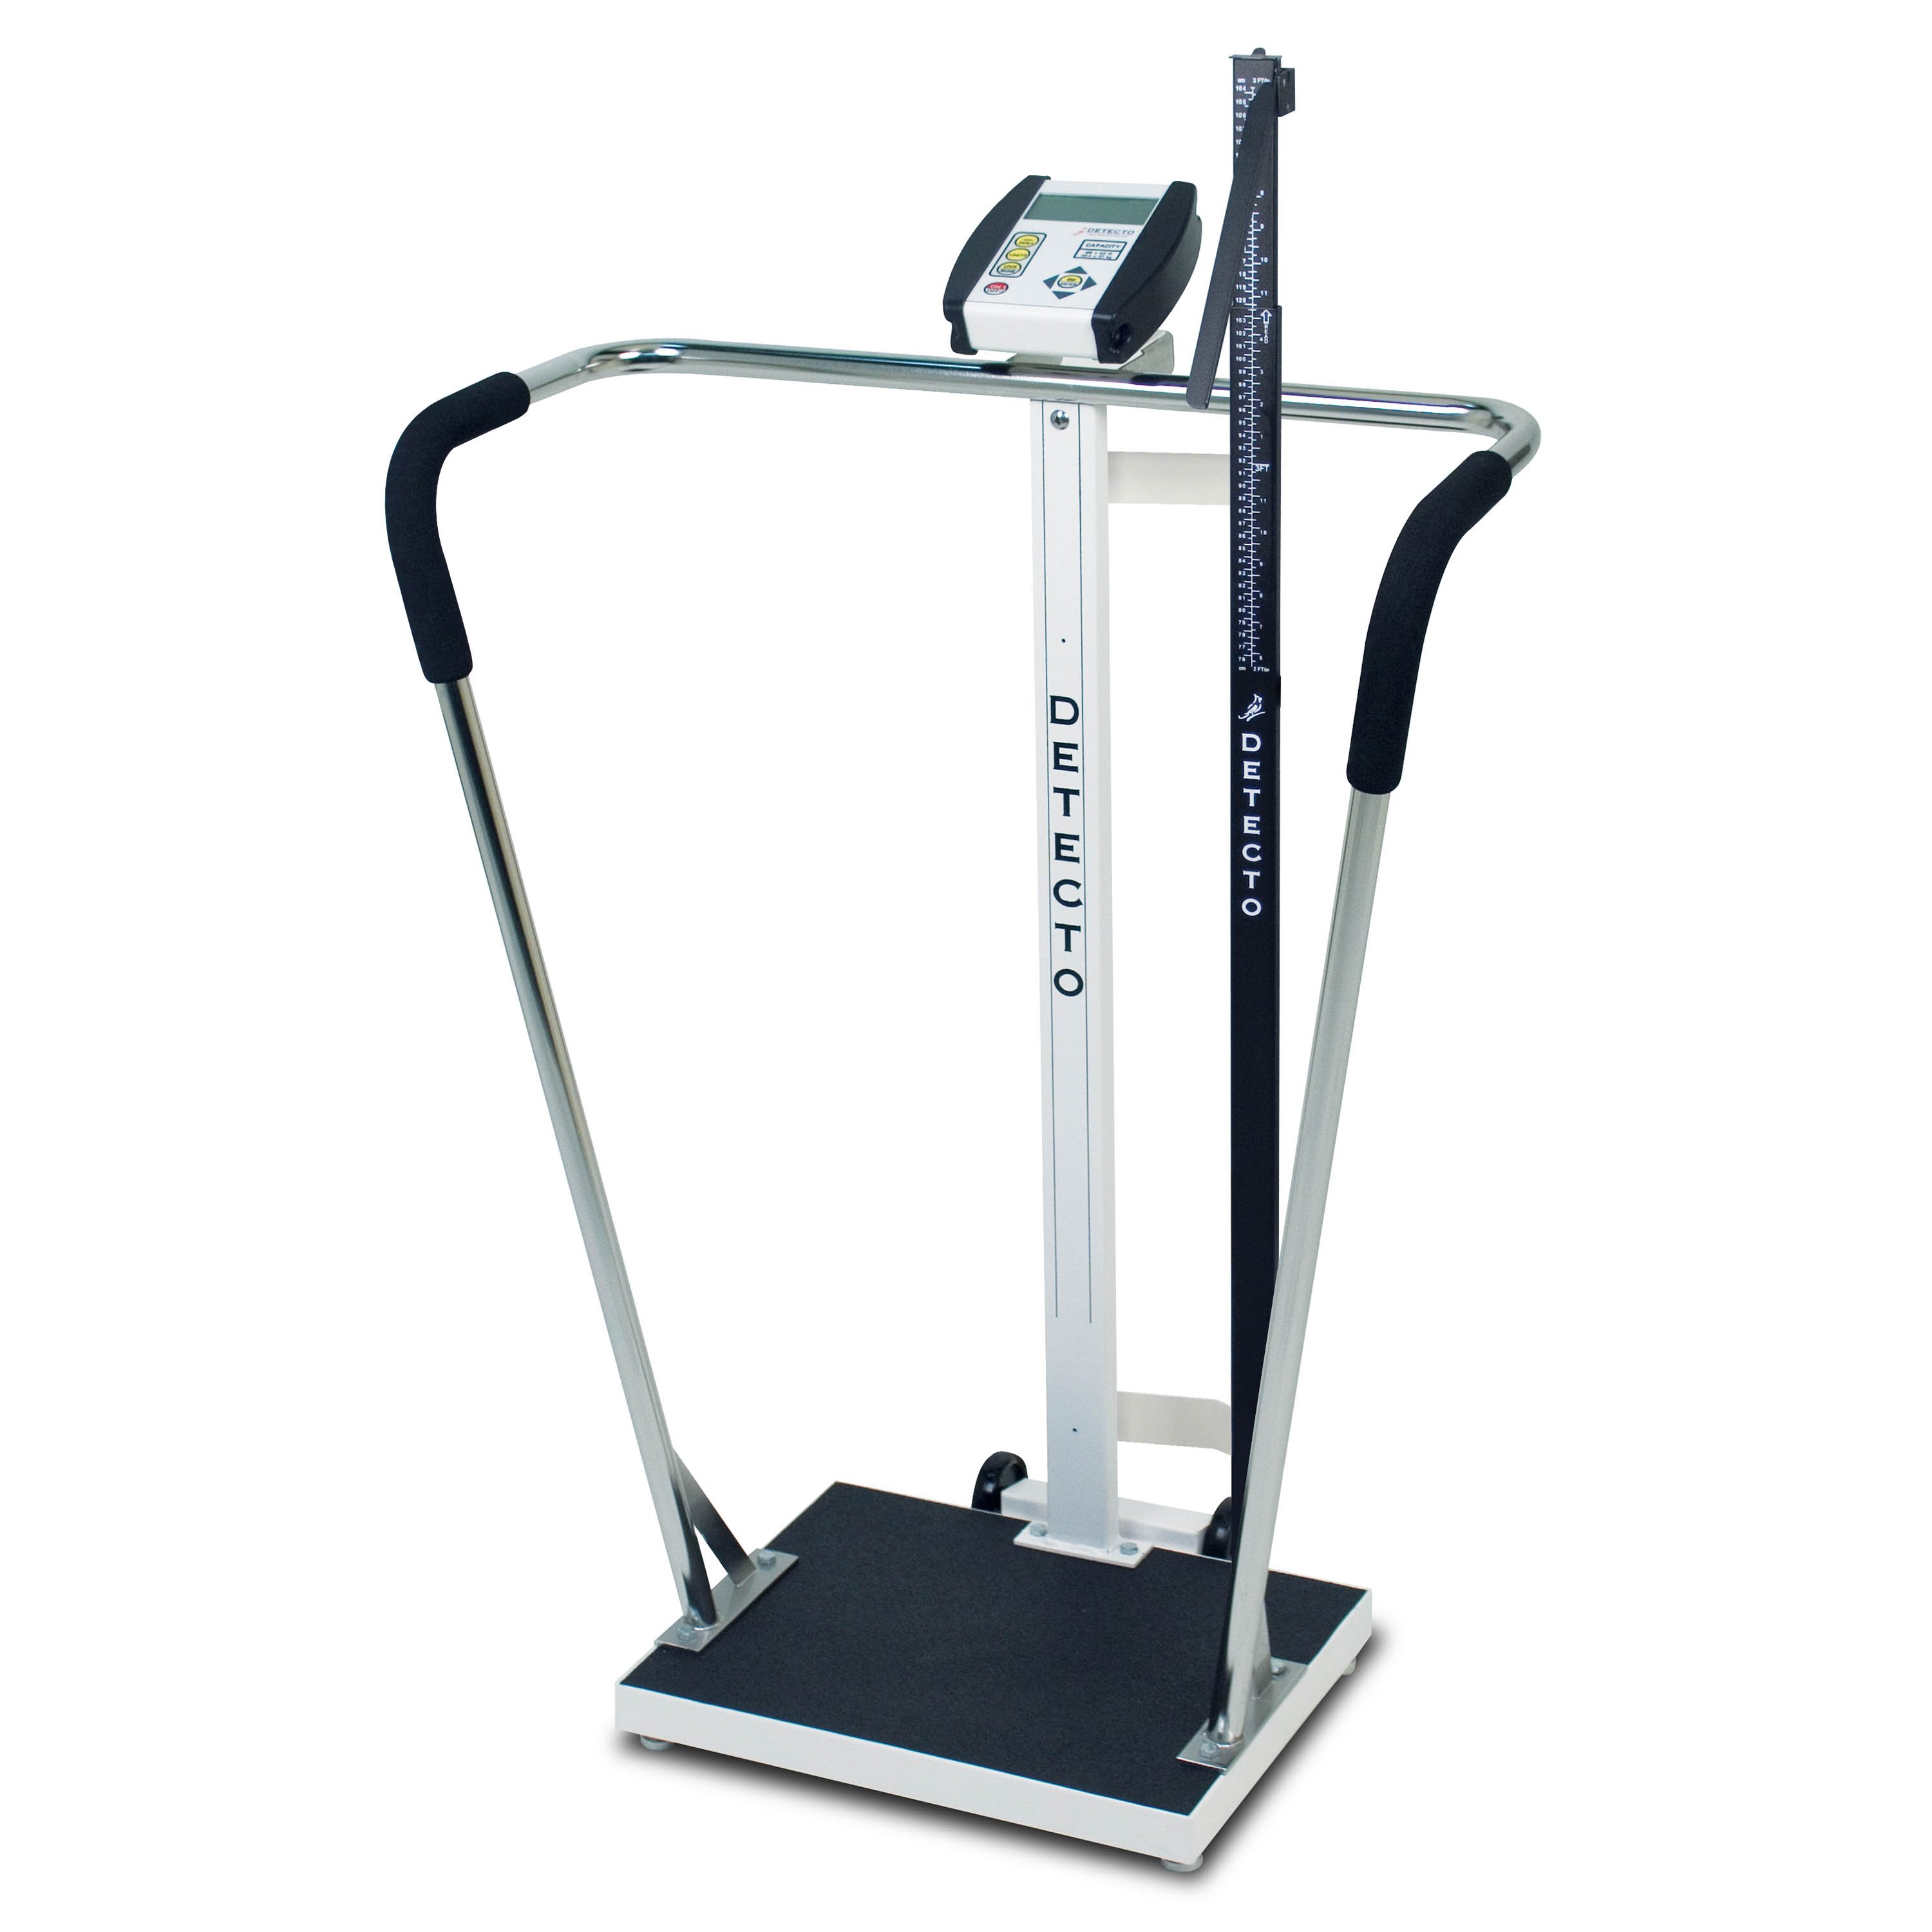 https://www.universalmedicalinc.com/media/catalog/product/cache/f176254afc5001a35a1c727280299a84/6/8/6855mhr_digital-waist-high-stand-on-scale-with-mechanical-height-rod.jpg